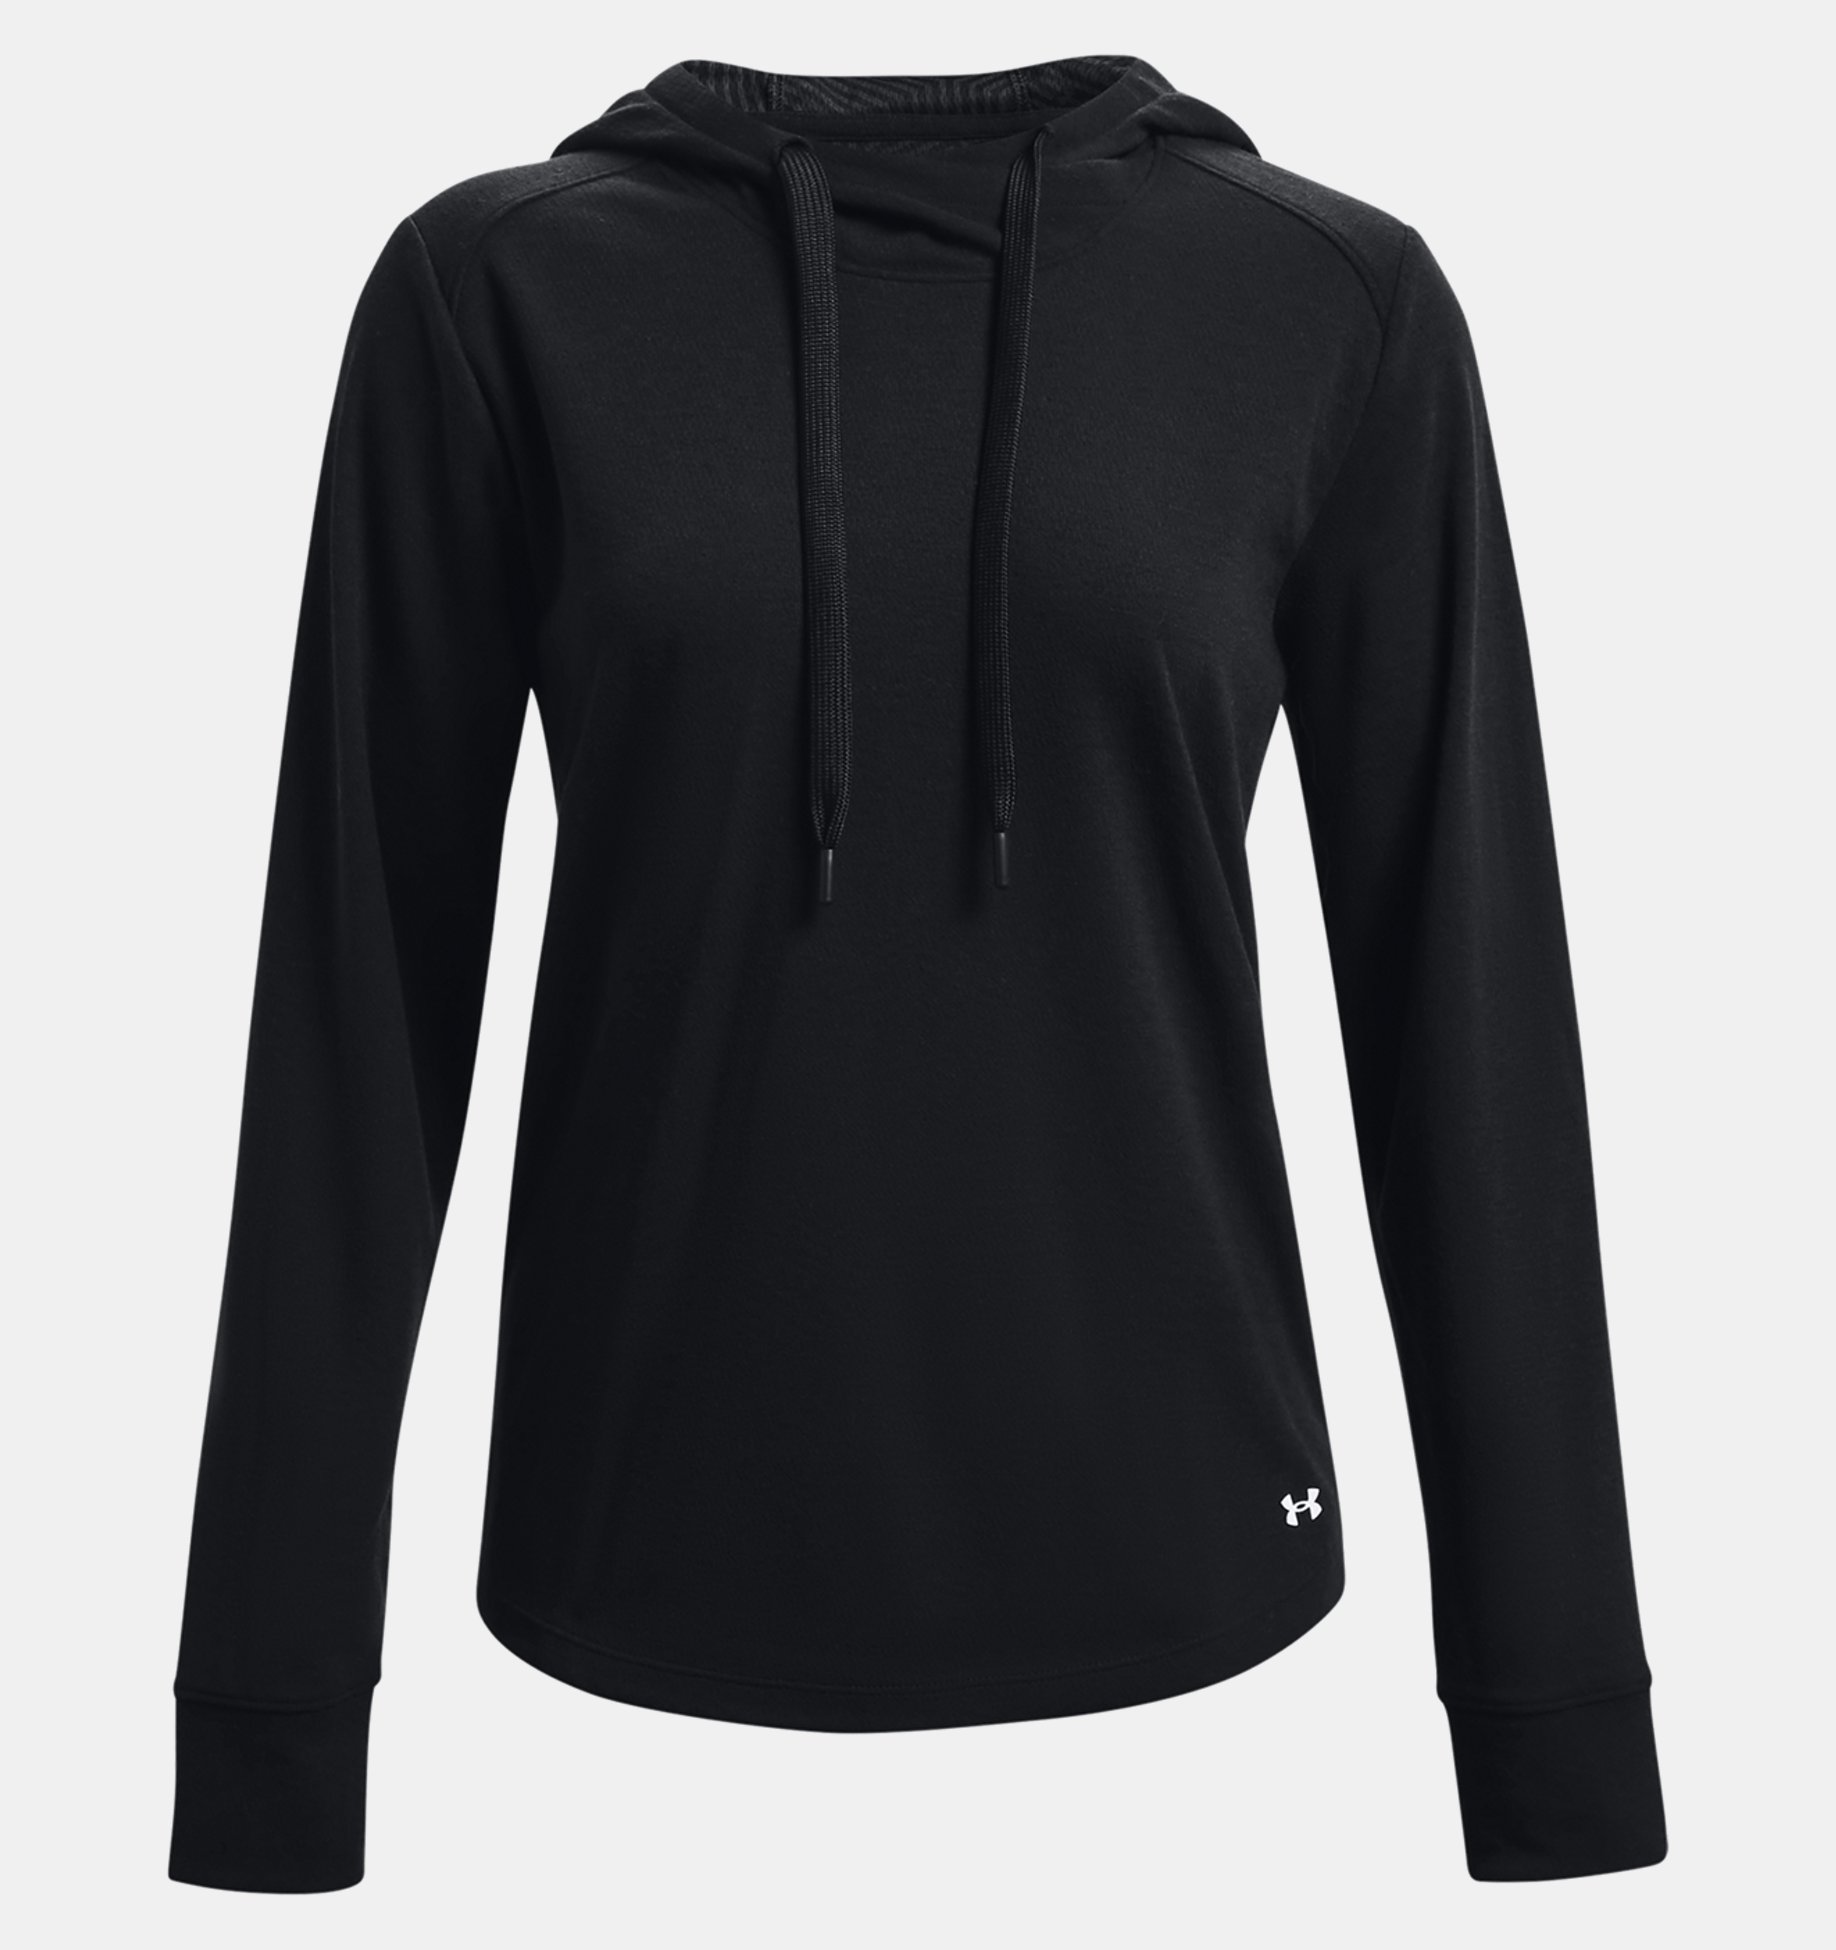 Under Armour UA Women’s ColdGear Dobson infrared Black Hoodie Small to XL BN 